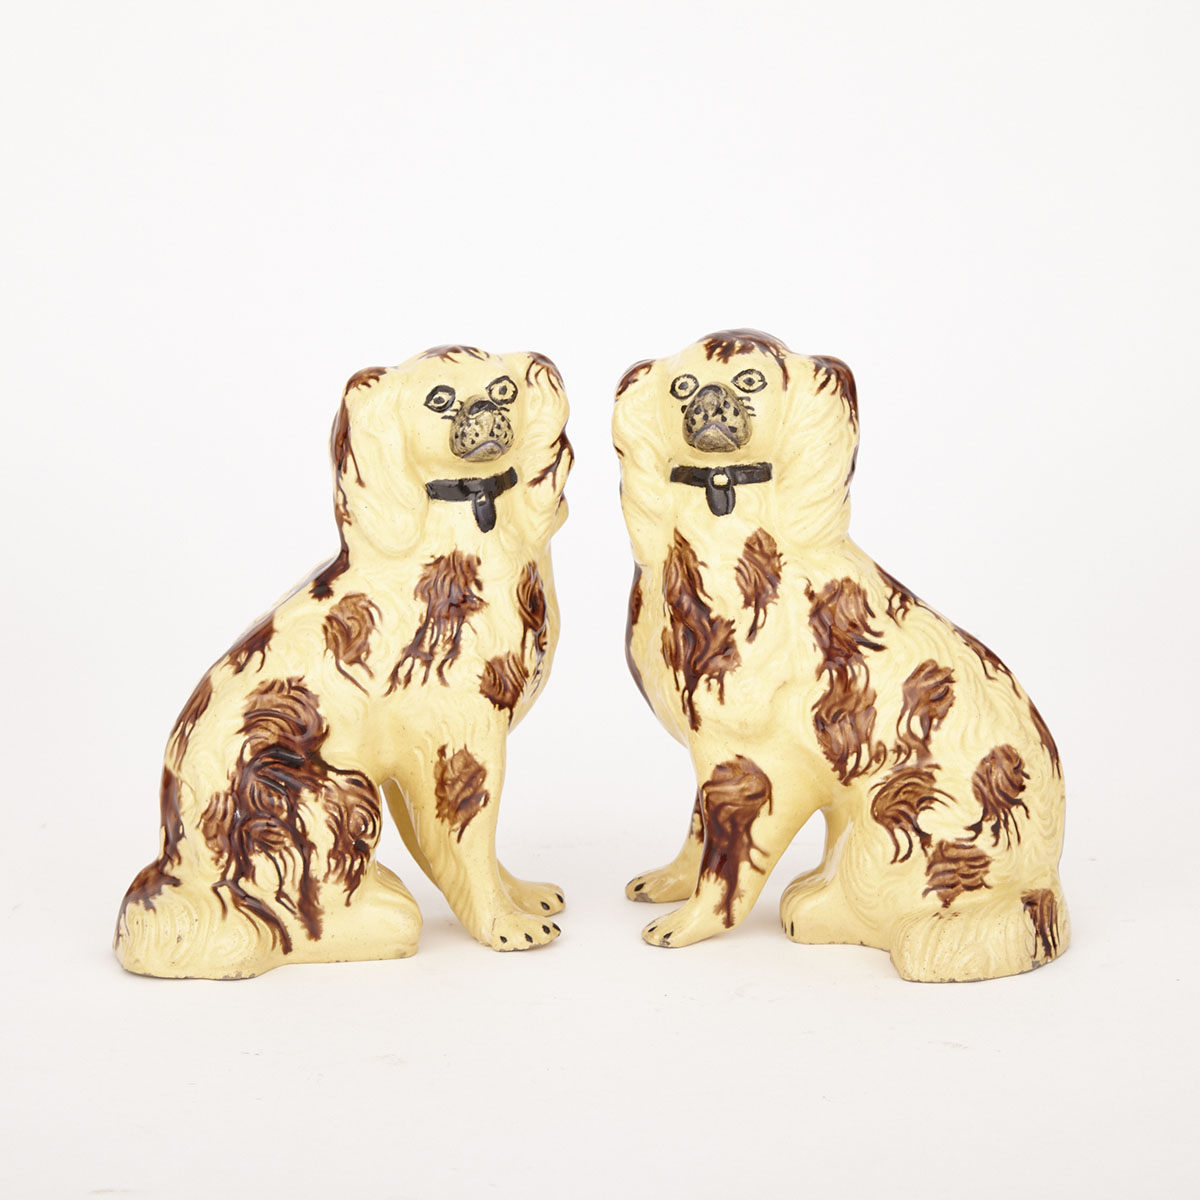 Pair of Yellow and Brown Glazed Staffordshire Dogs, 19th century